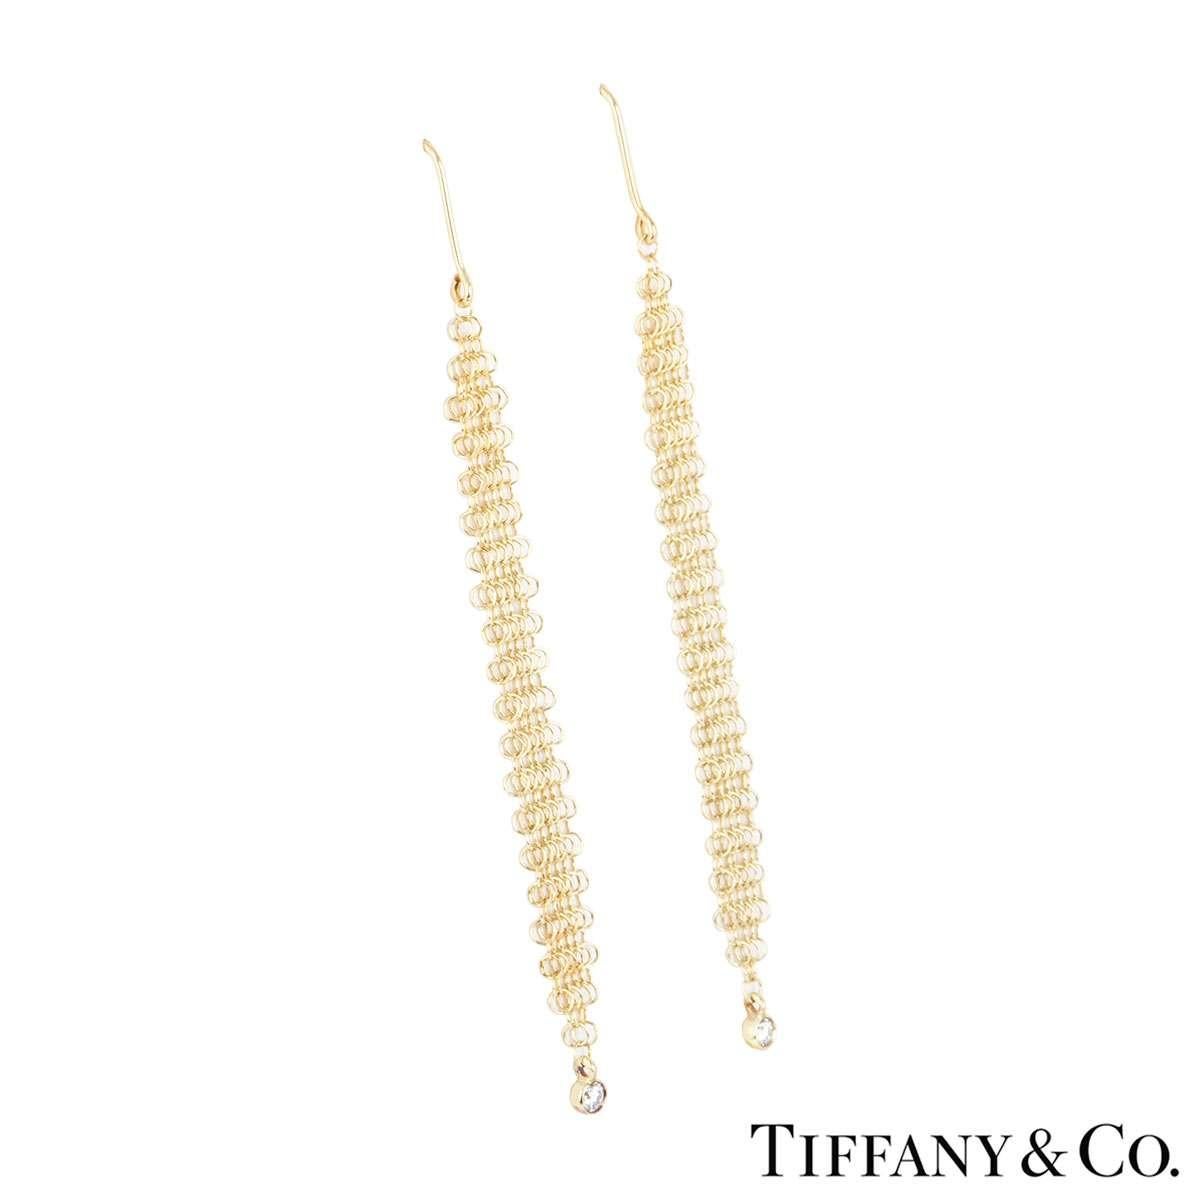 A pair of 18k yellow gold drop earrings from the Elsa Peretti collection by Tiffany & Co. The earrings are composed of a mesh body suspending a single round brilliant cut diamond at the bottom totalling 0.06ct. The earrings measure 6.5cm in length